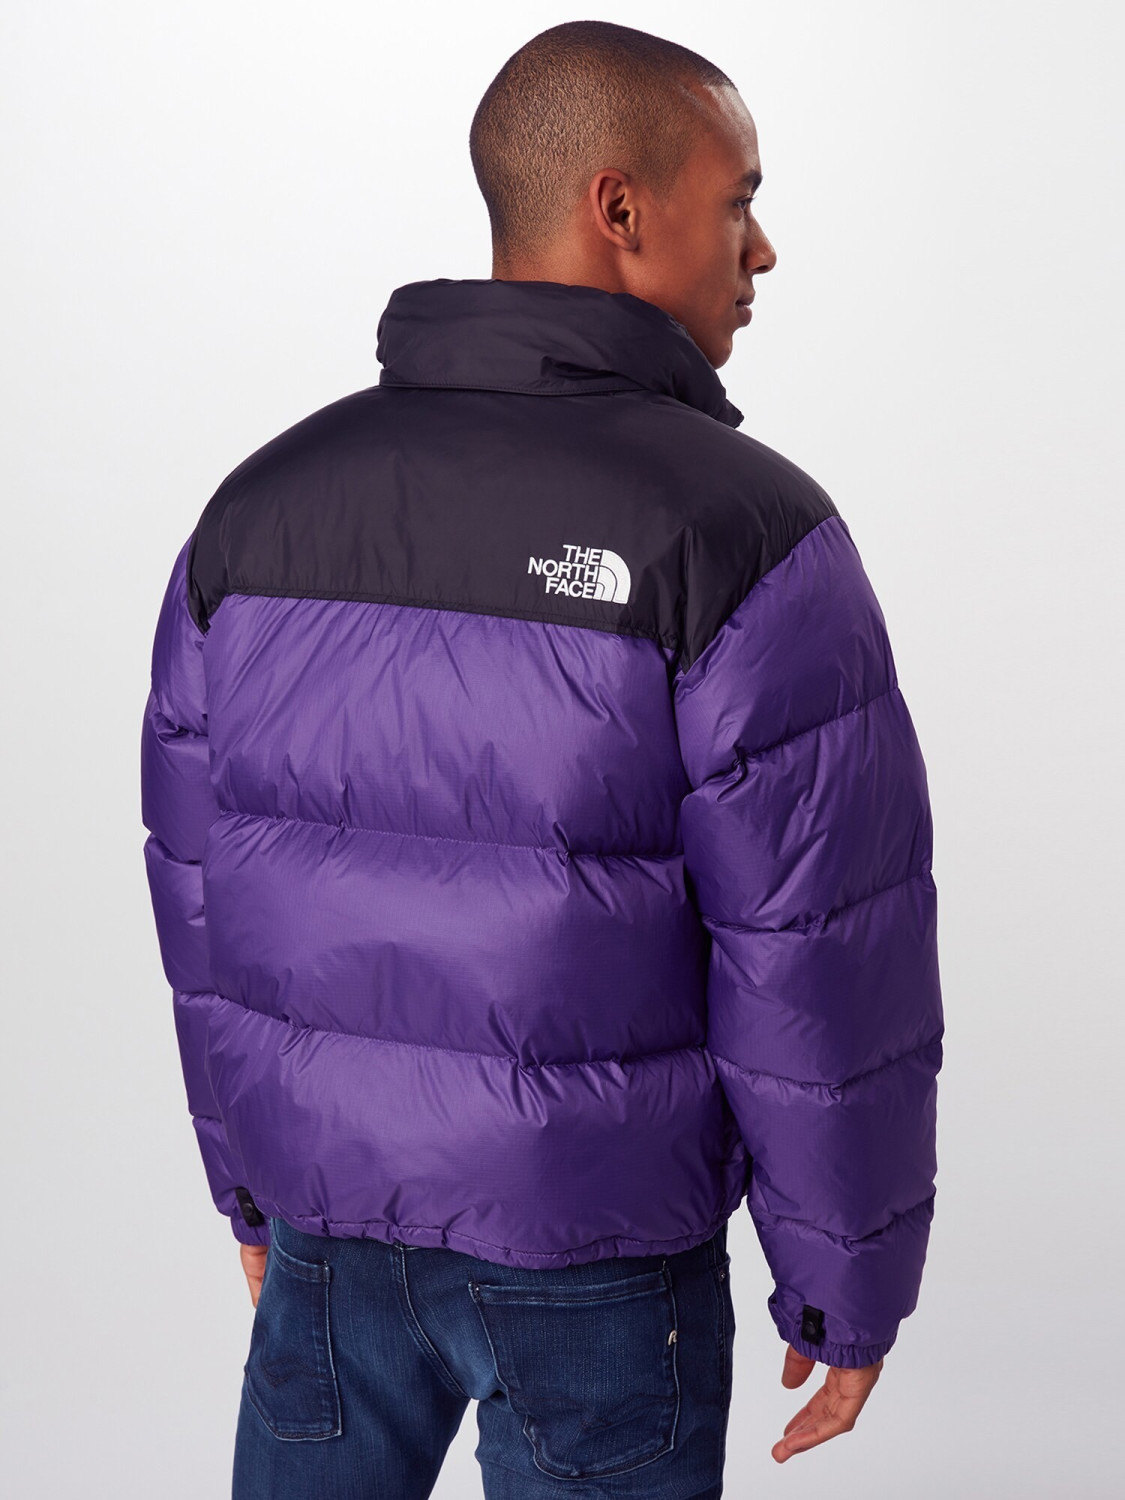 Buy The North Face 1996 Retro Nuptse Jacket Purple From £315 00 Today